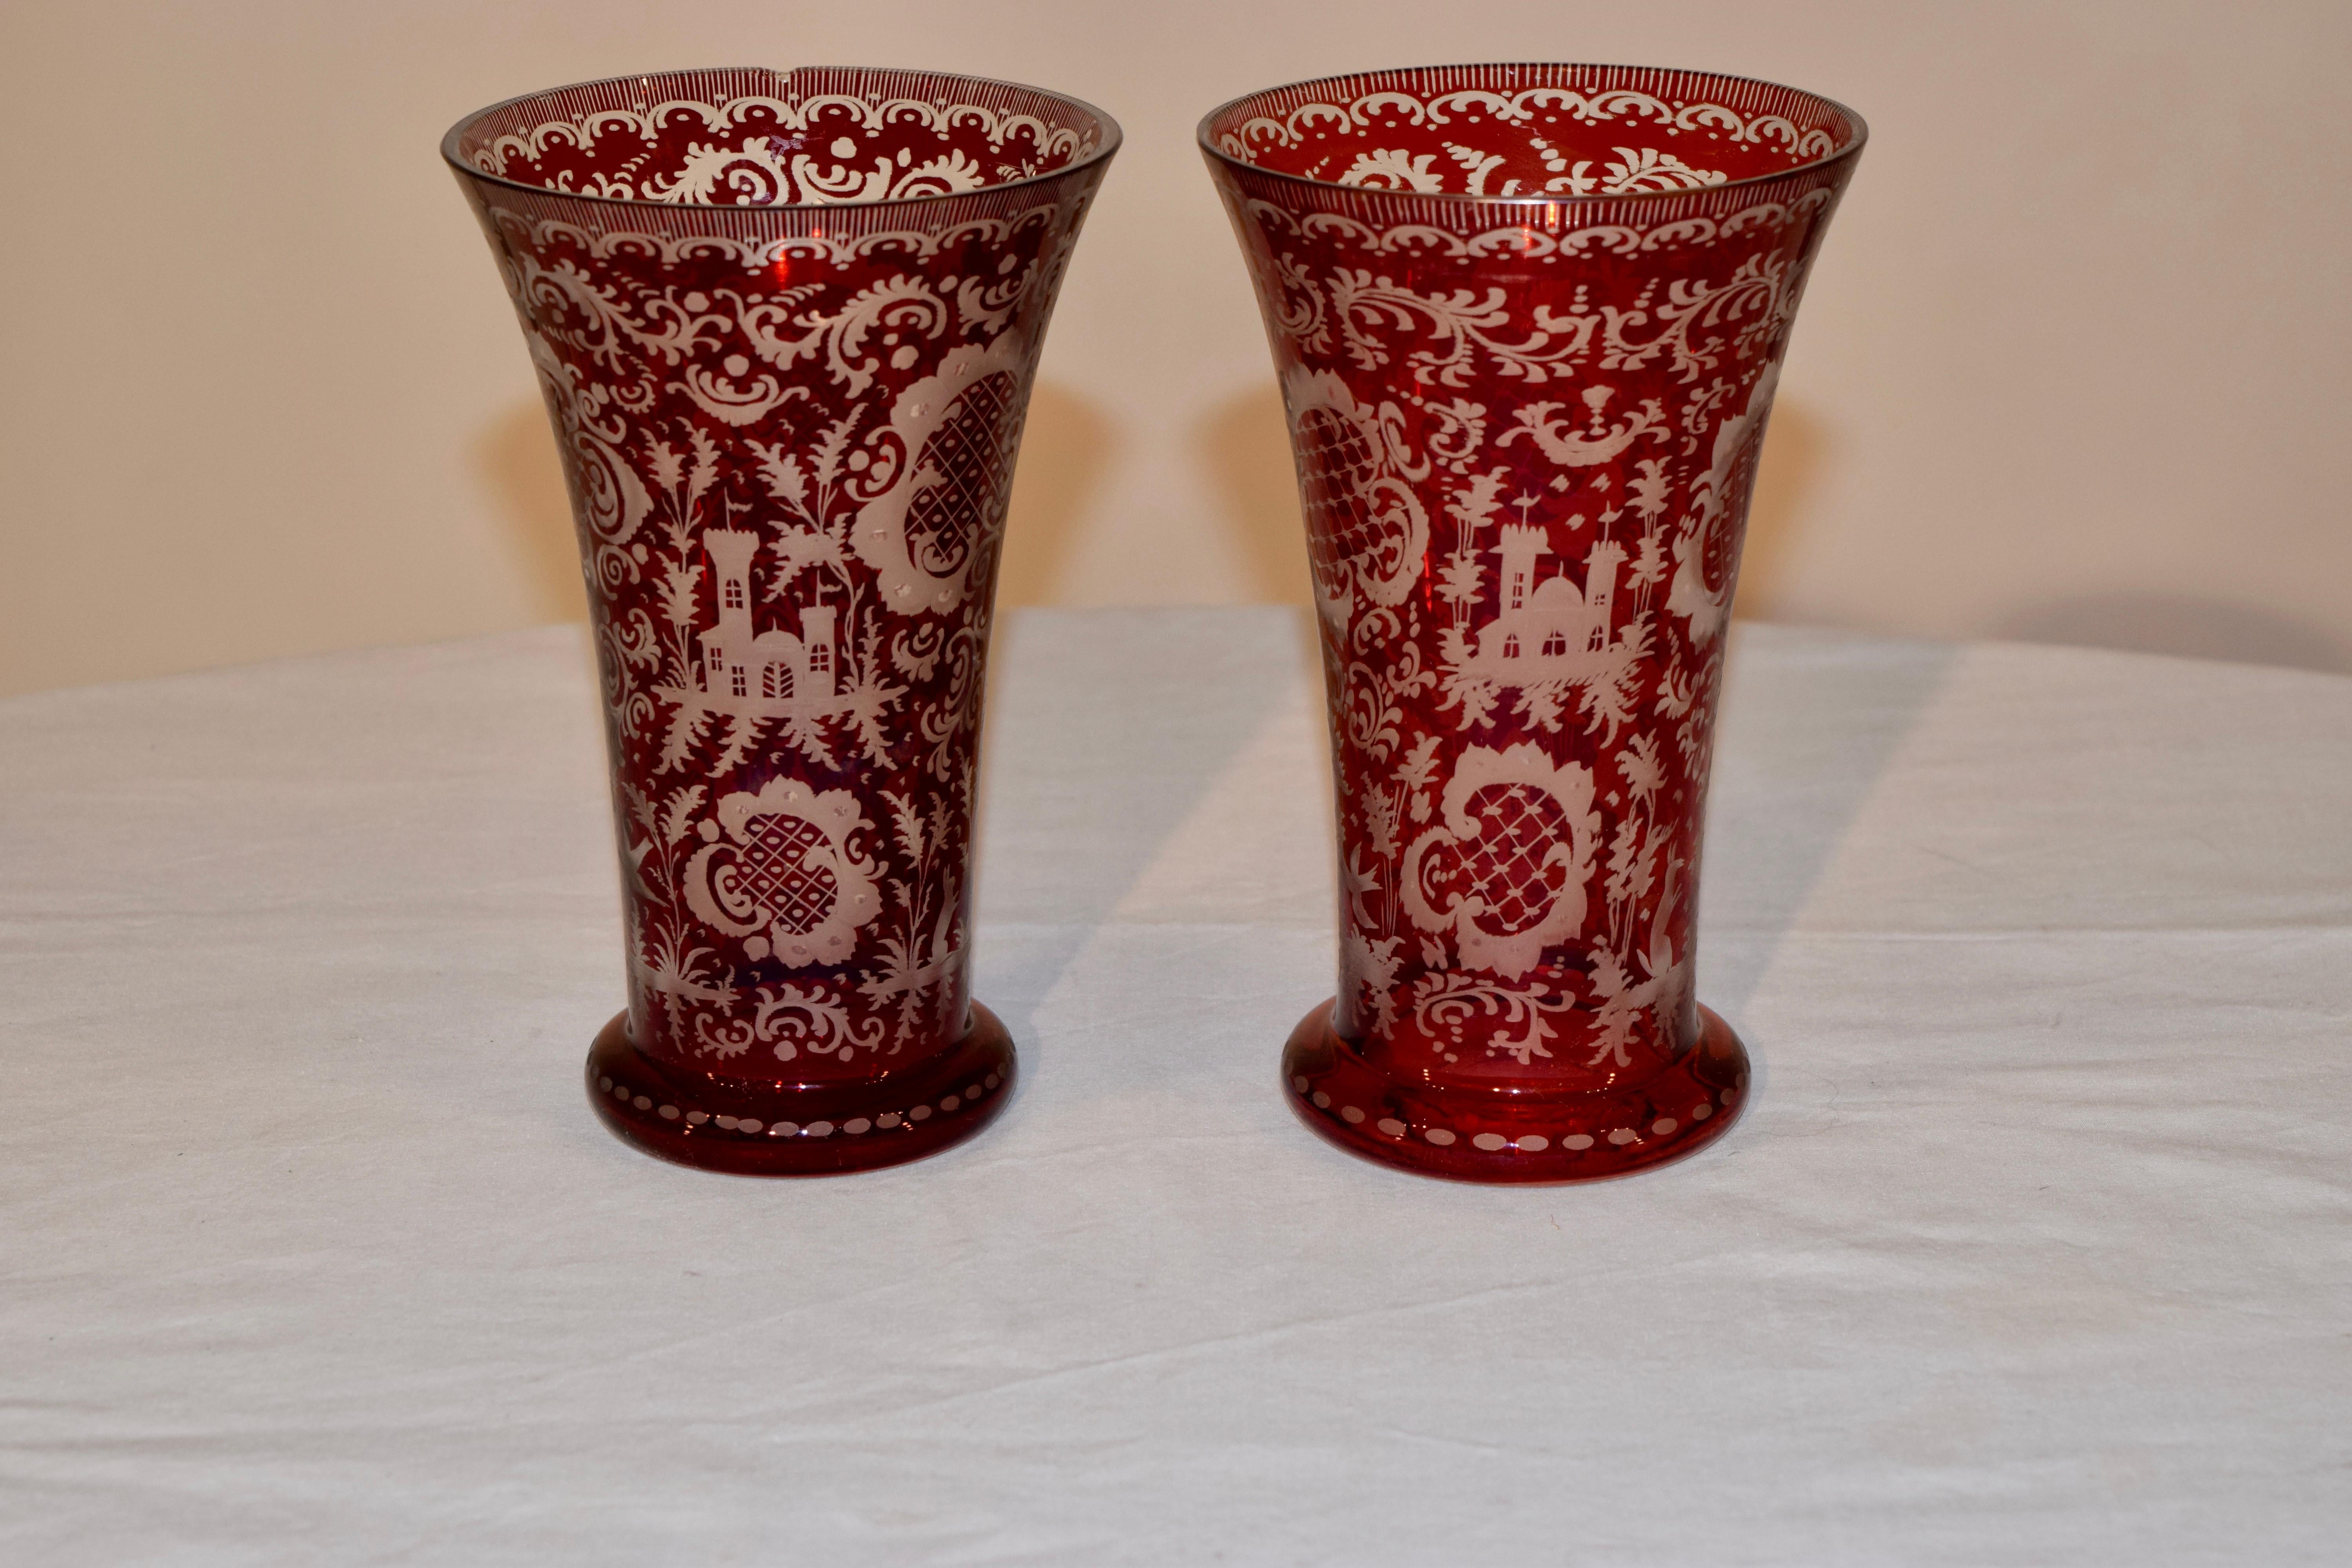 Pair of Bohemian flash cut cranberry to clear cut glass vases with scenes of castles, deer and fauna. Highly decorative. One small repair to rim, which is photographed. The bases measure 3.5